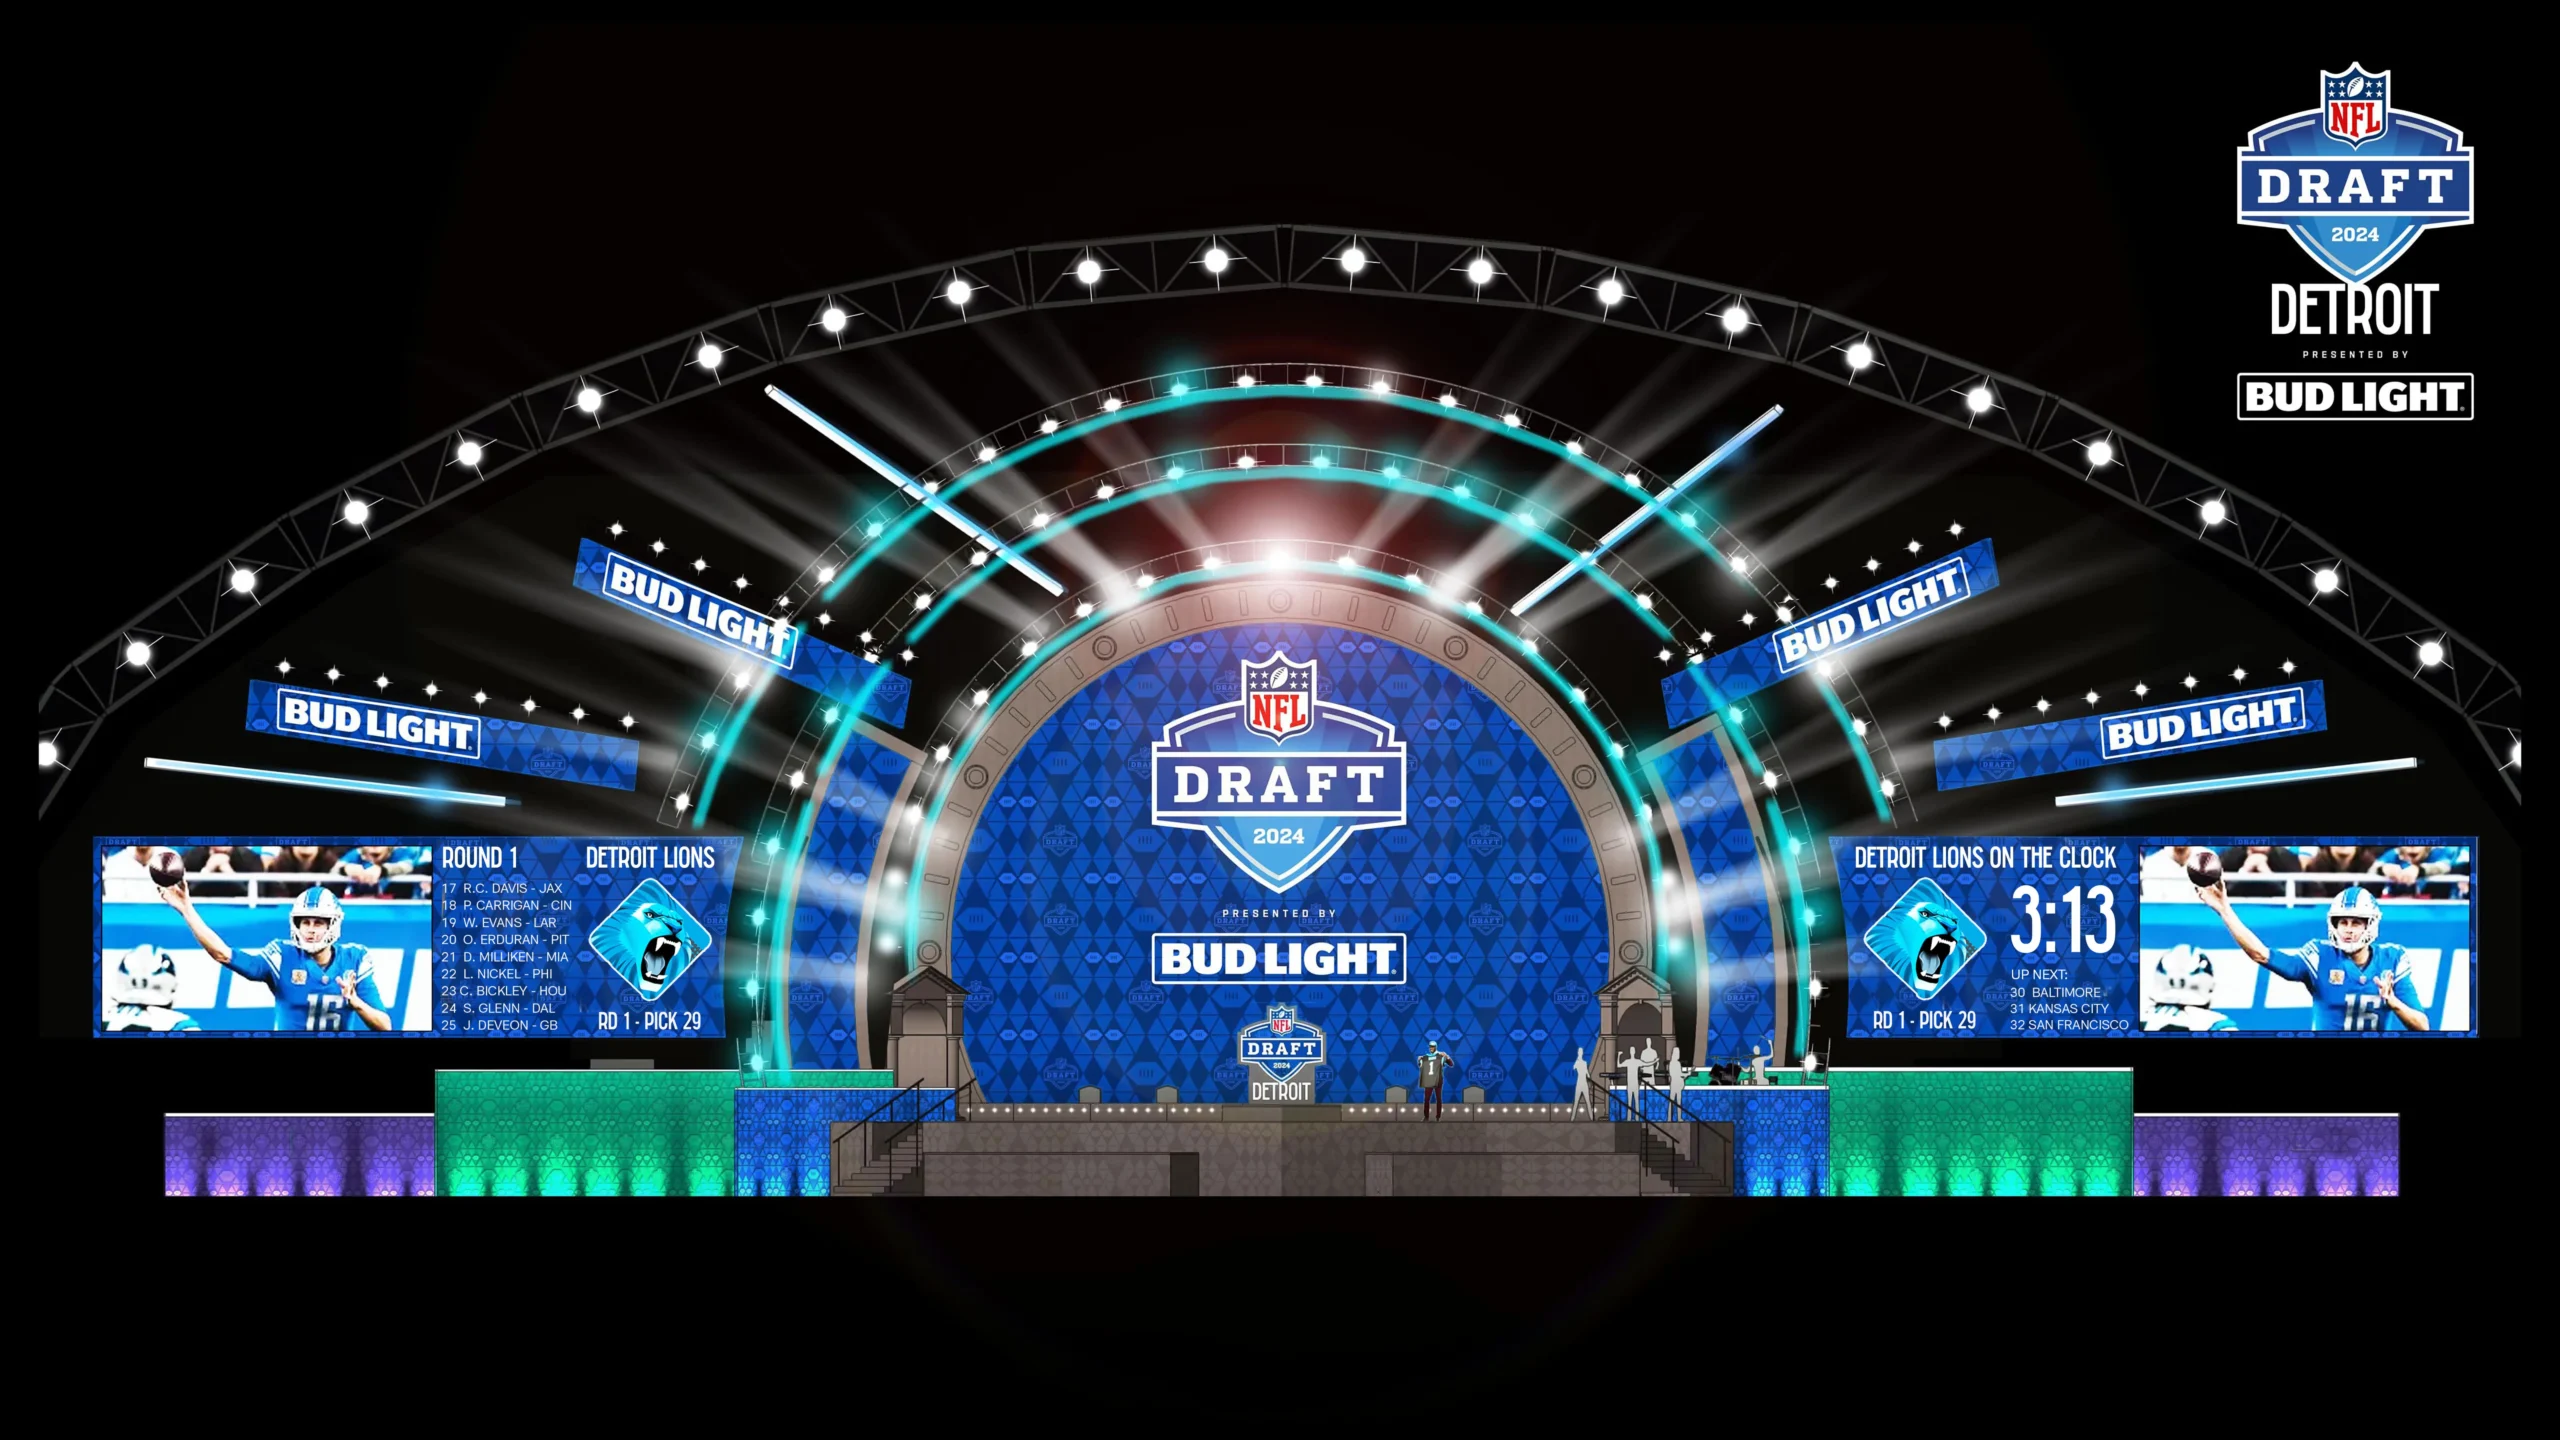 NFL Draft has added Prayer Hall's for the NFL Draft Experience in Detroit